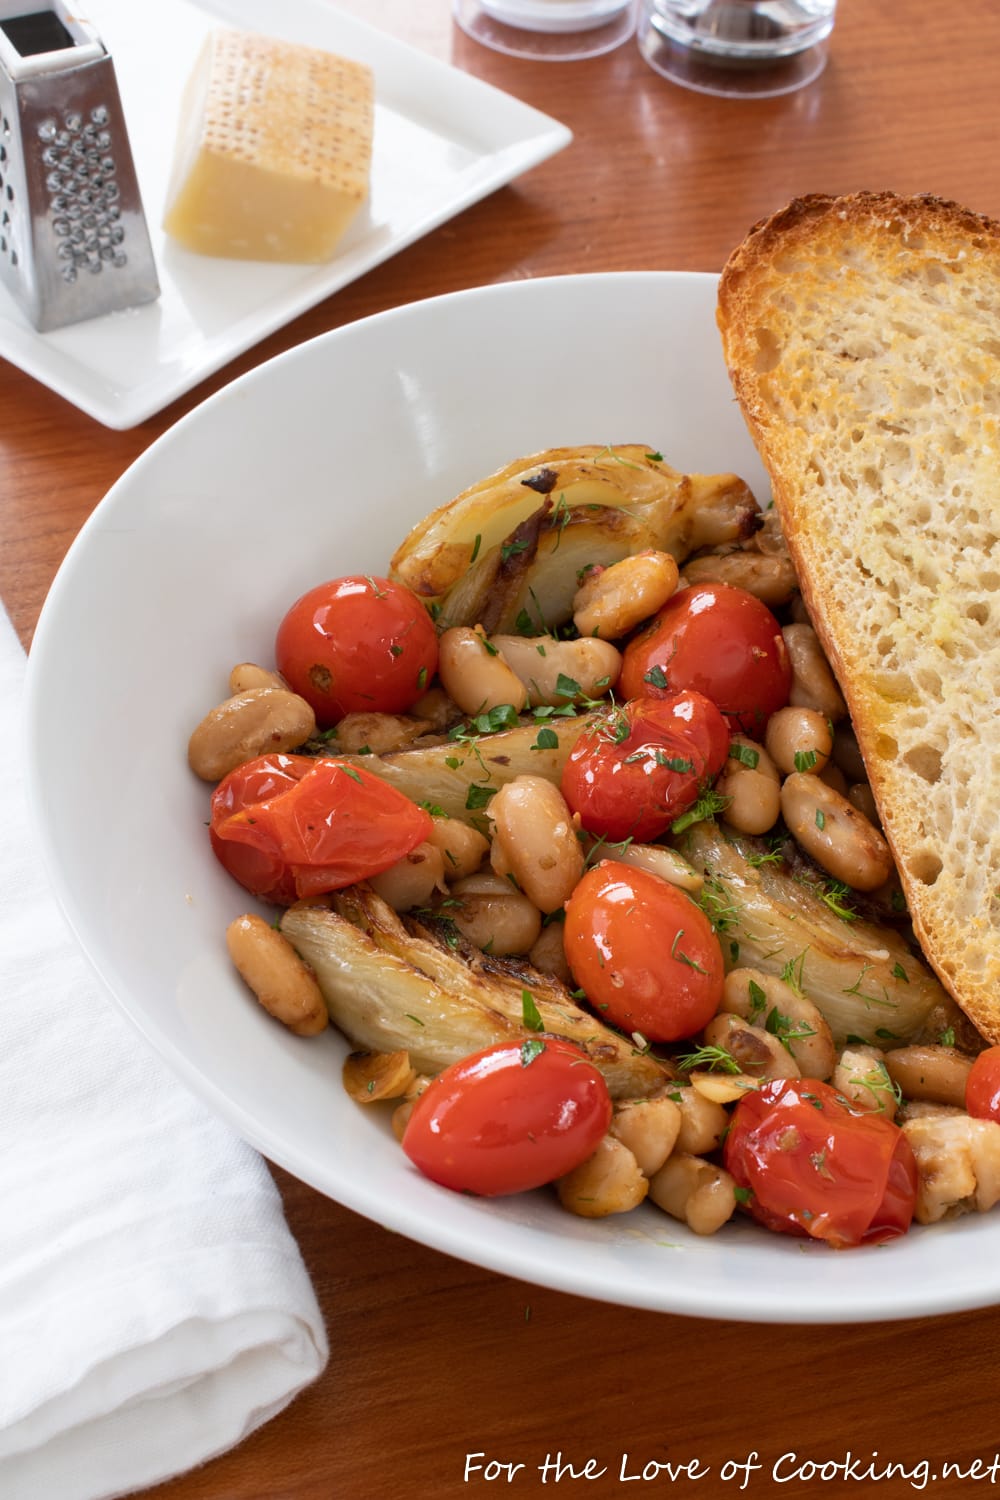 Roasted Fennel, Tomatoes, and White Beans